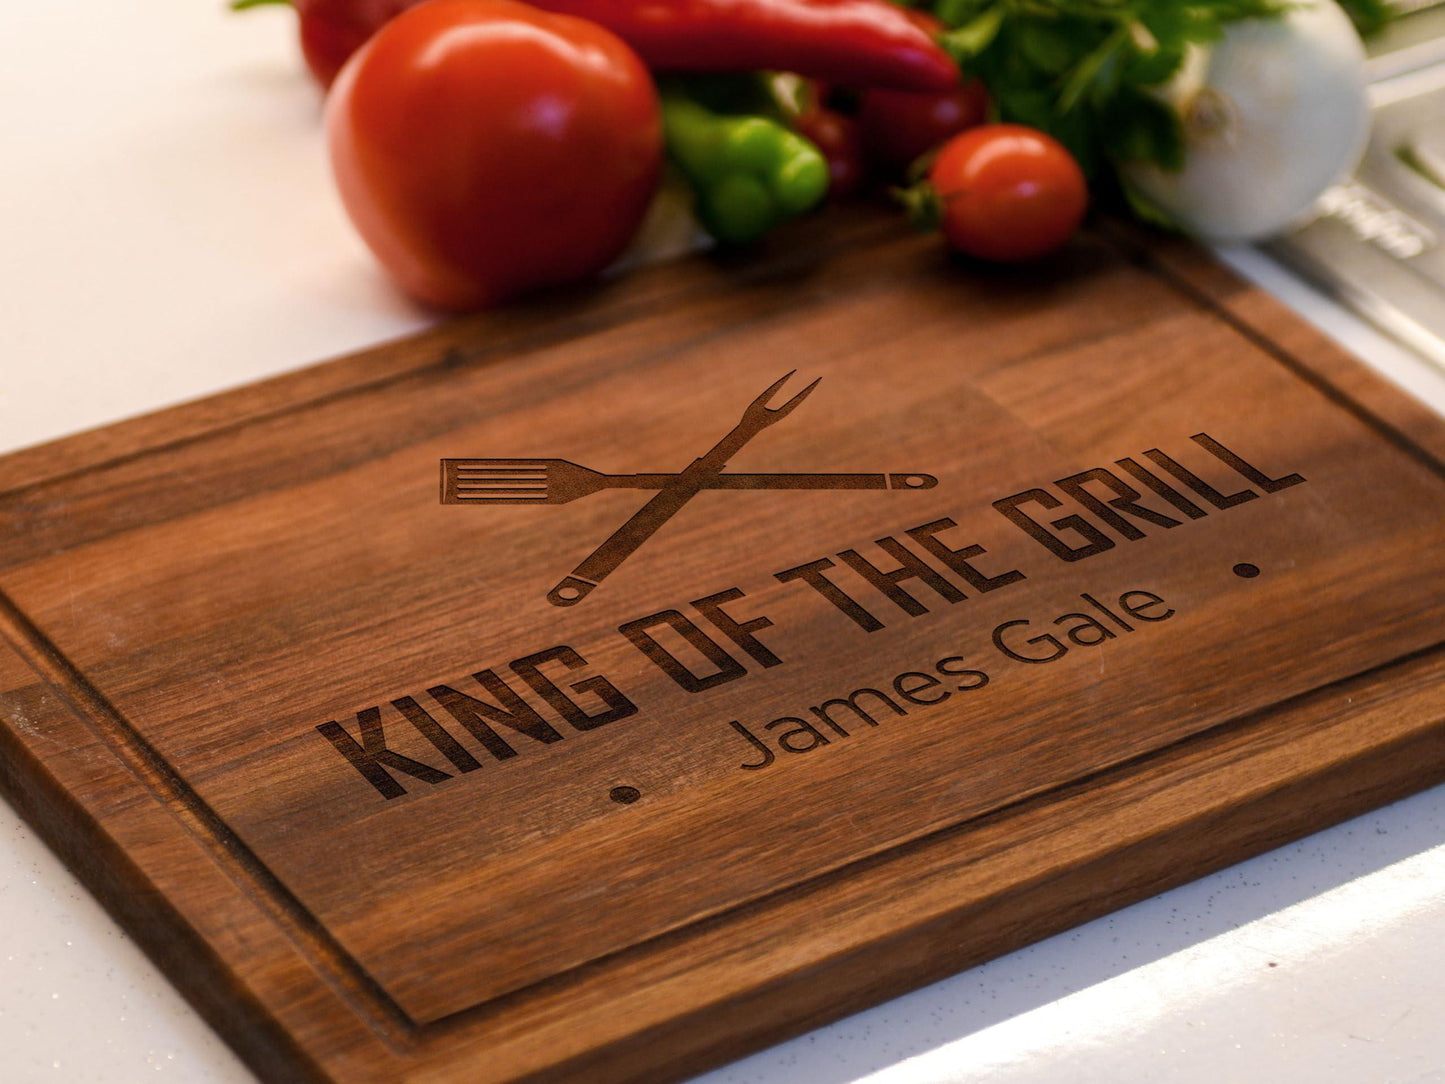 King of the Grill, Cutting Board, Personalized Cutting Boards for Men and Dad, Fathers Day, Dad's Birthday, Christmas Gift, Custom Cooking Gift, BBQ Gifts, Kitchen Gift, With Apron and Display Stand - CookCave